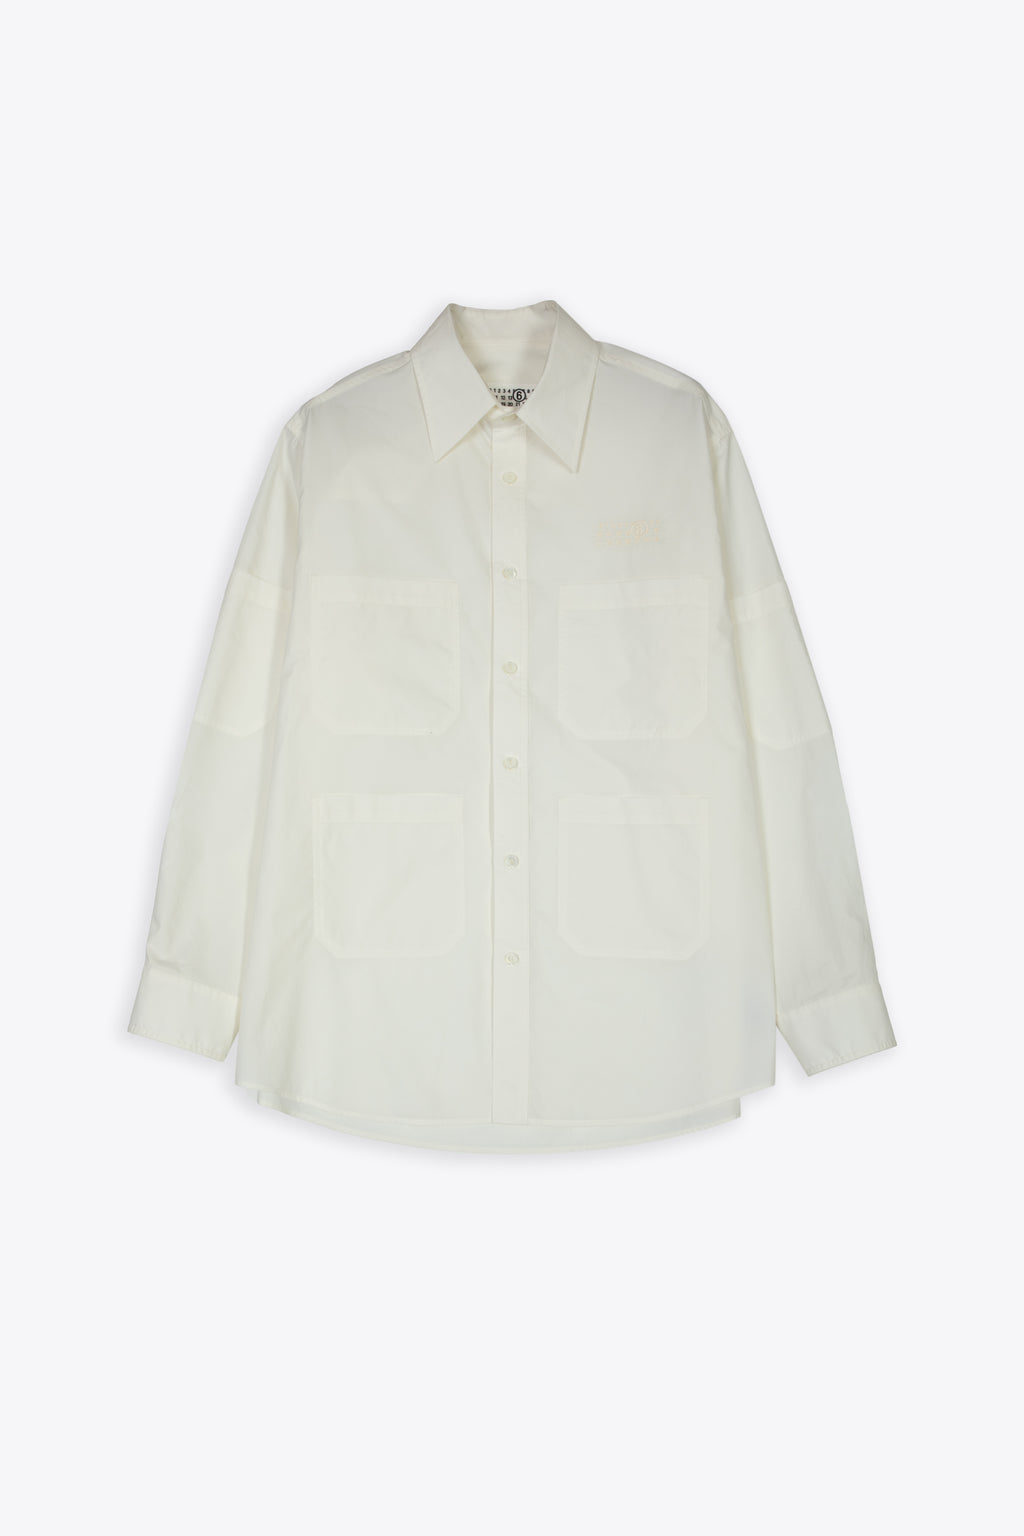 alt-image__Off-white-poplin-cotton-shirt-with-front-pockets